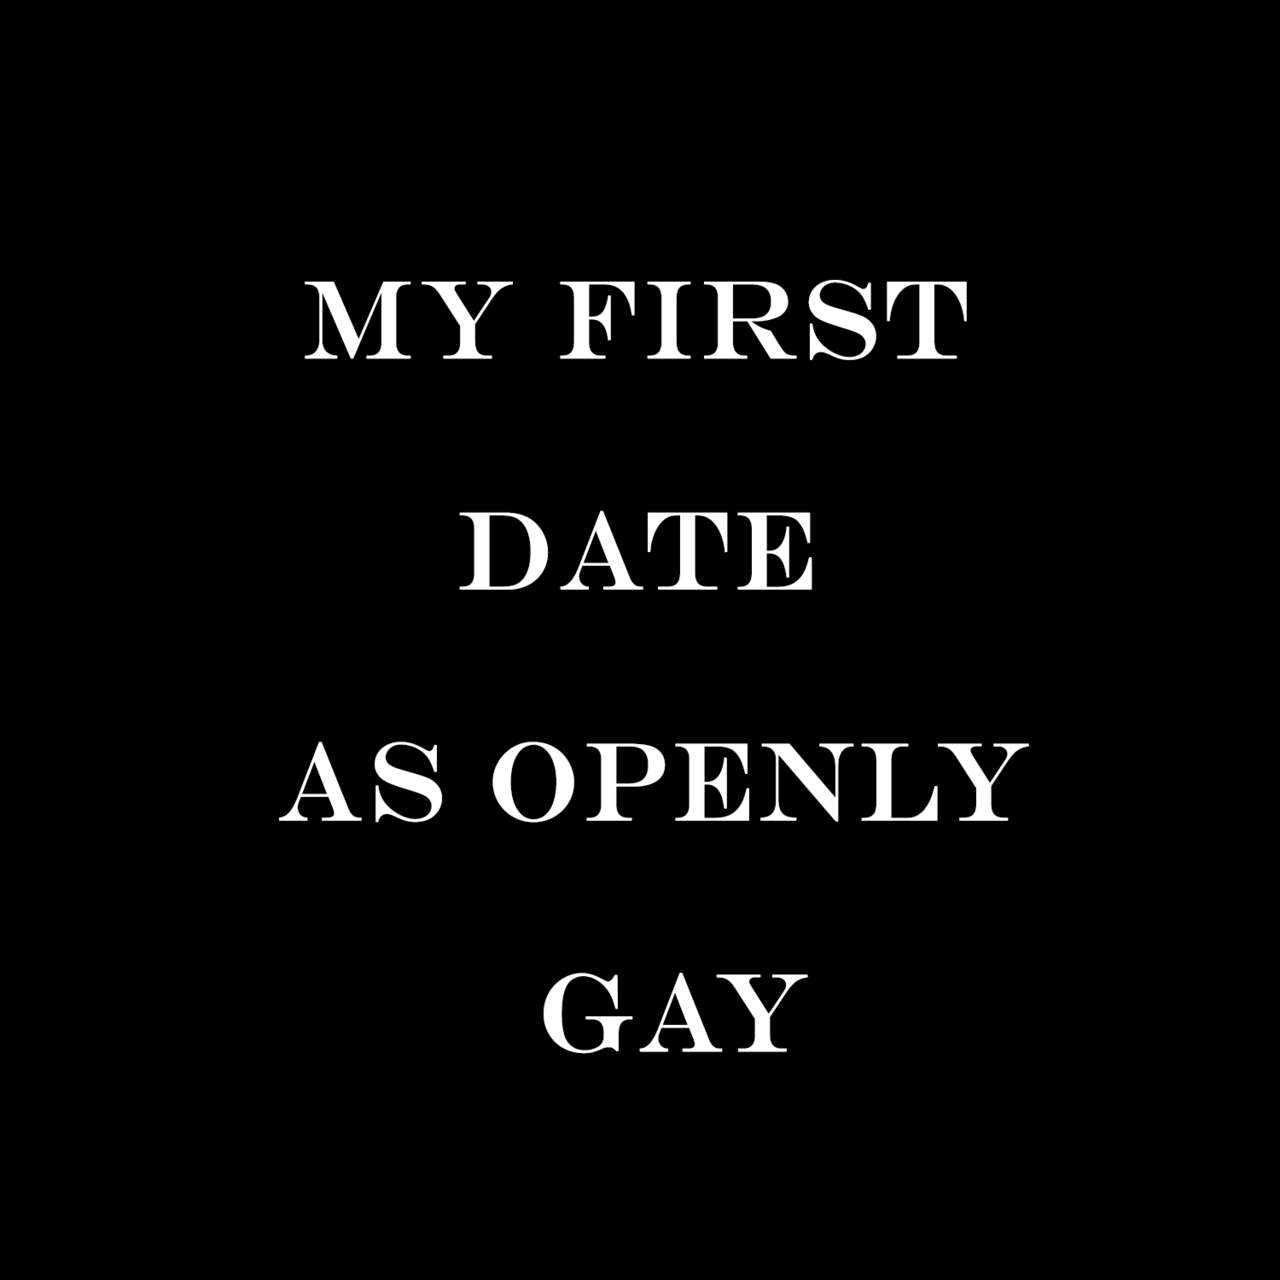 MY FIRST DATE AS GAY 0